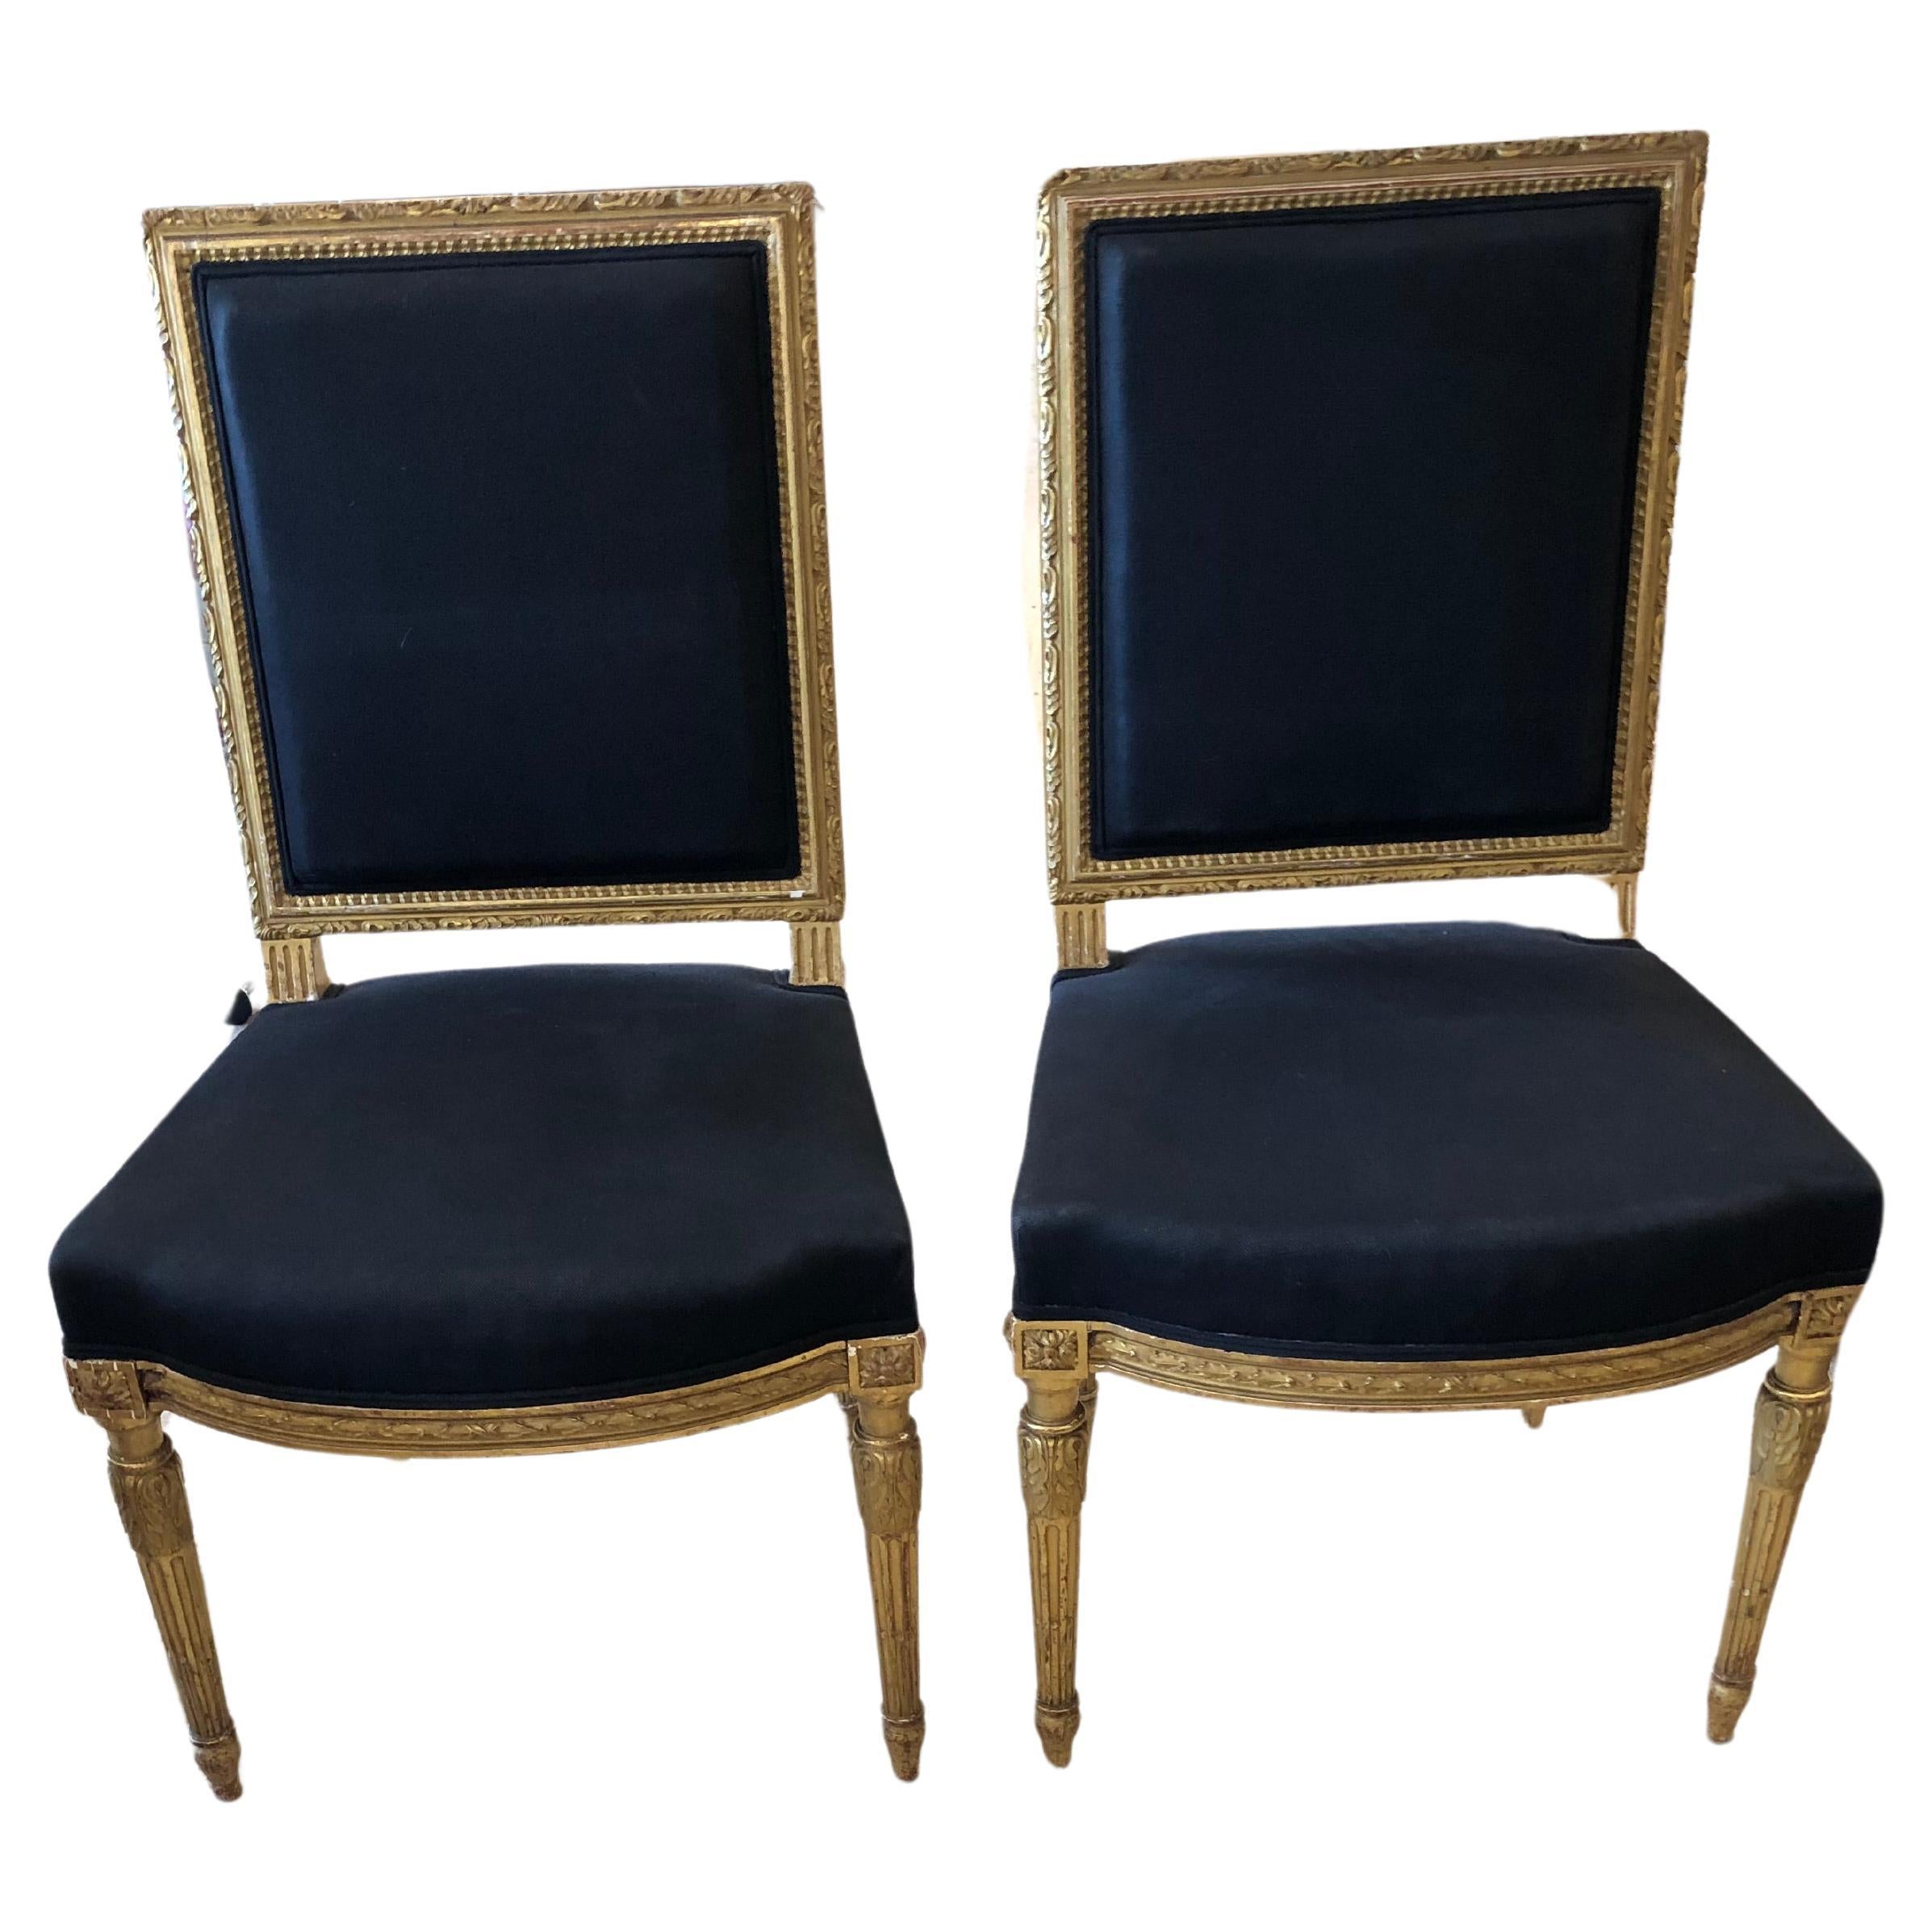 Pretty Louis XVI French Giltwood and Upholstered Fauteuils Sidechairs For Sale